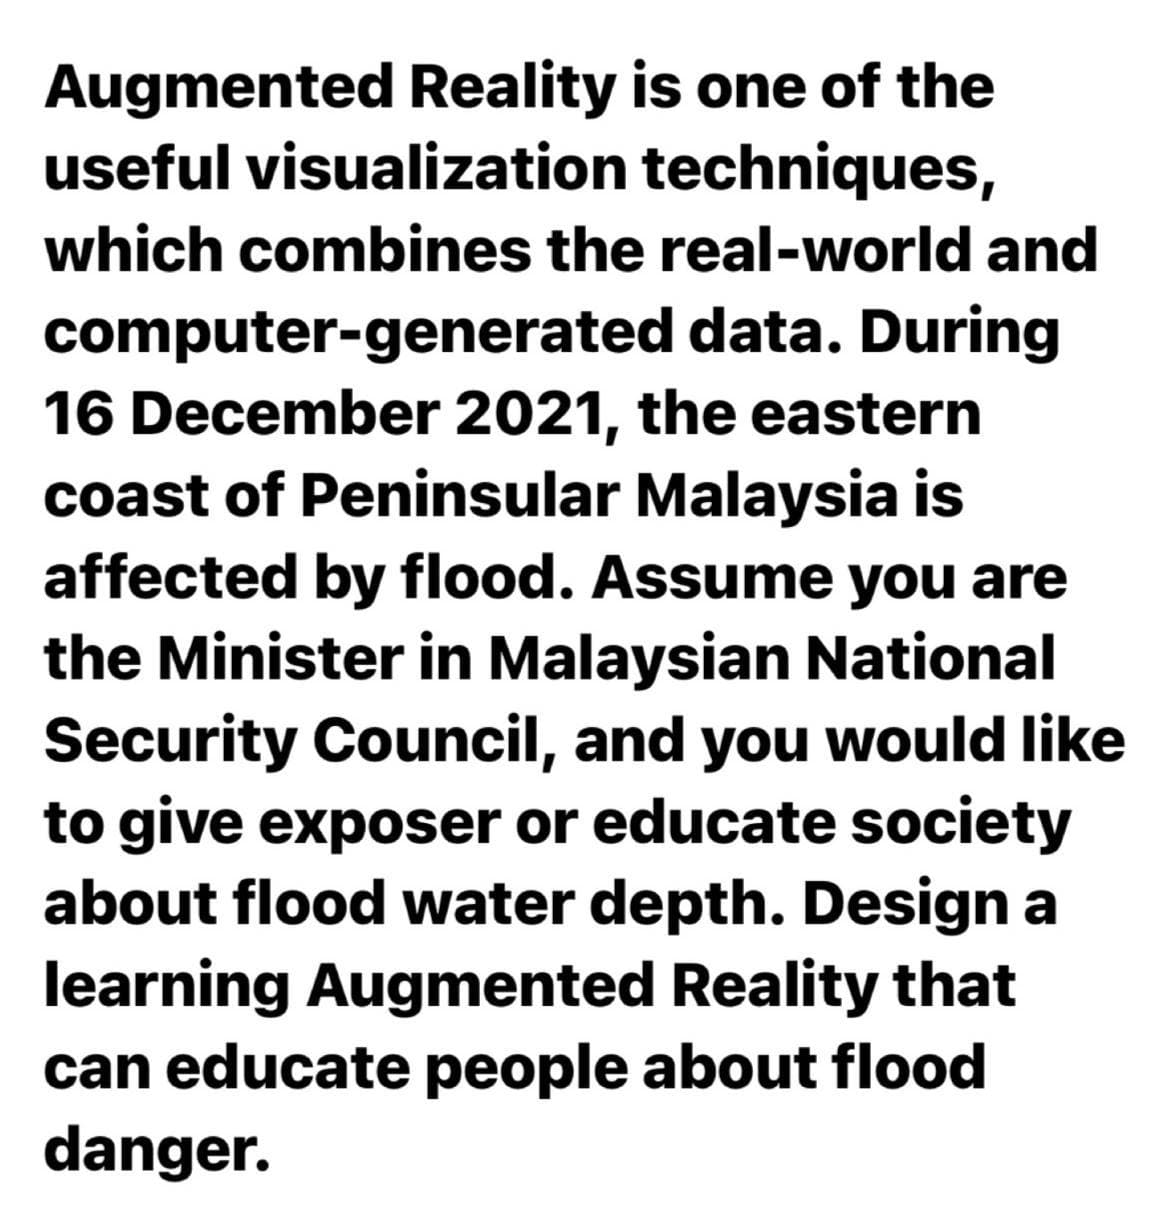 Augmented Reality is one of the
useful visualization techniques,
which combines the real-world and
computer-generated data. During
16 December 2021, the eastern
coast of Peninsular Malaysia is
affected by flood. Assume you are
the Minister in Malaysian National
Security Council, and you would like
to give exposer or educate society
about flood water depth. Design a
learning Augmented Reality that
can educate people about flood
danger.
